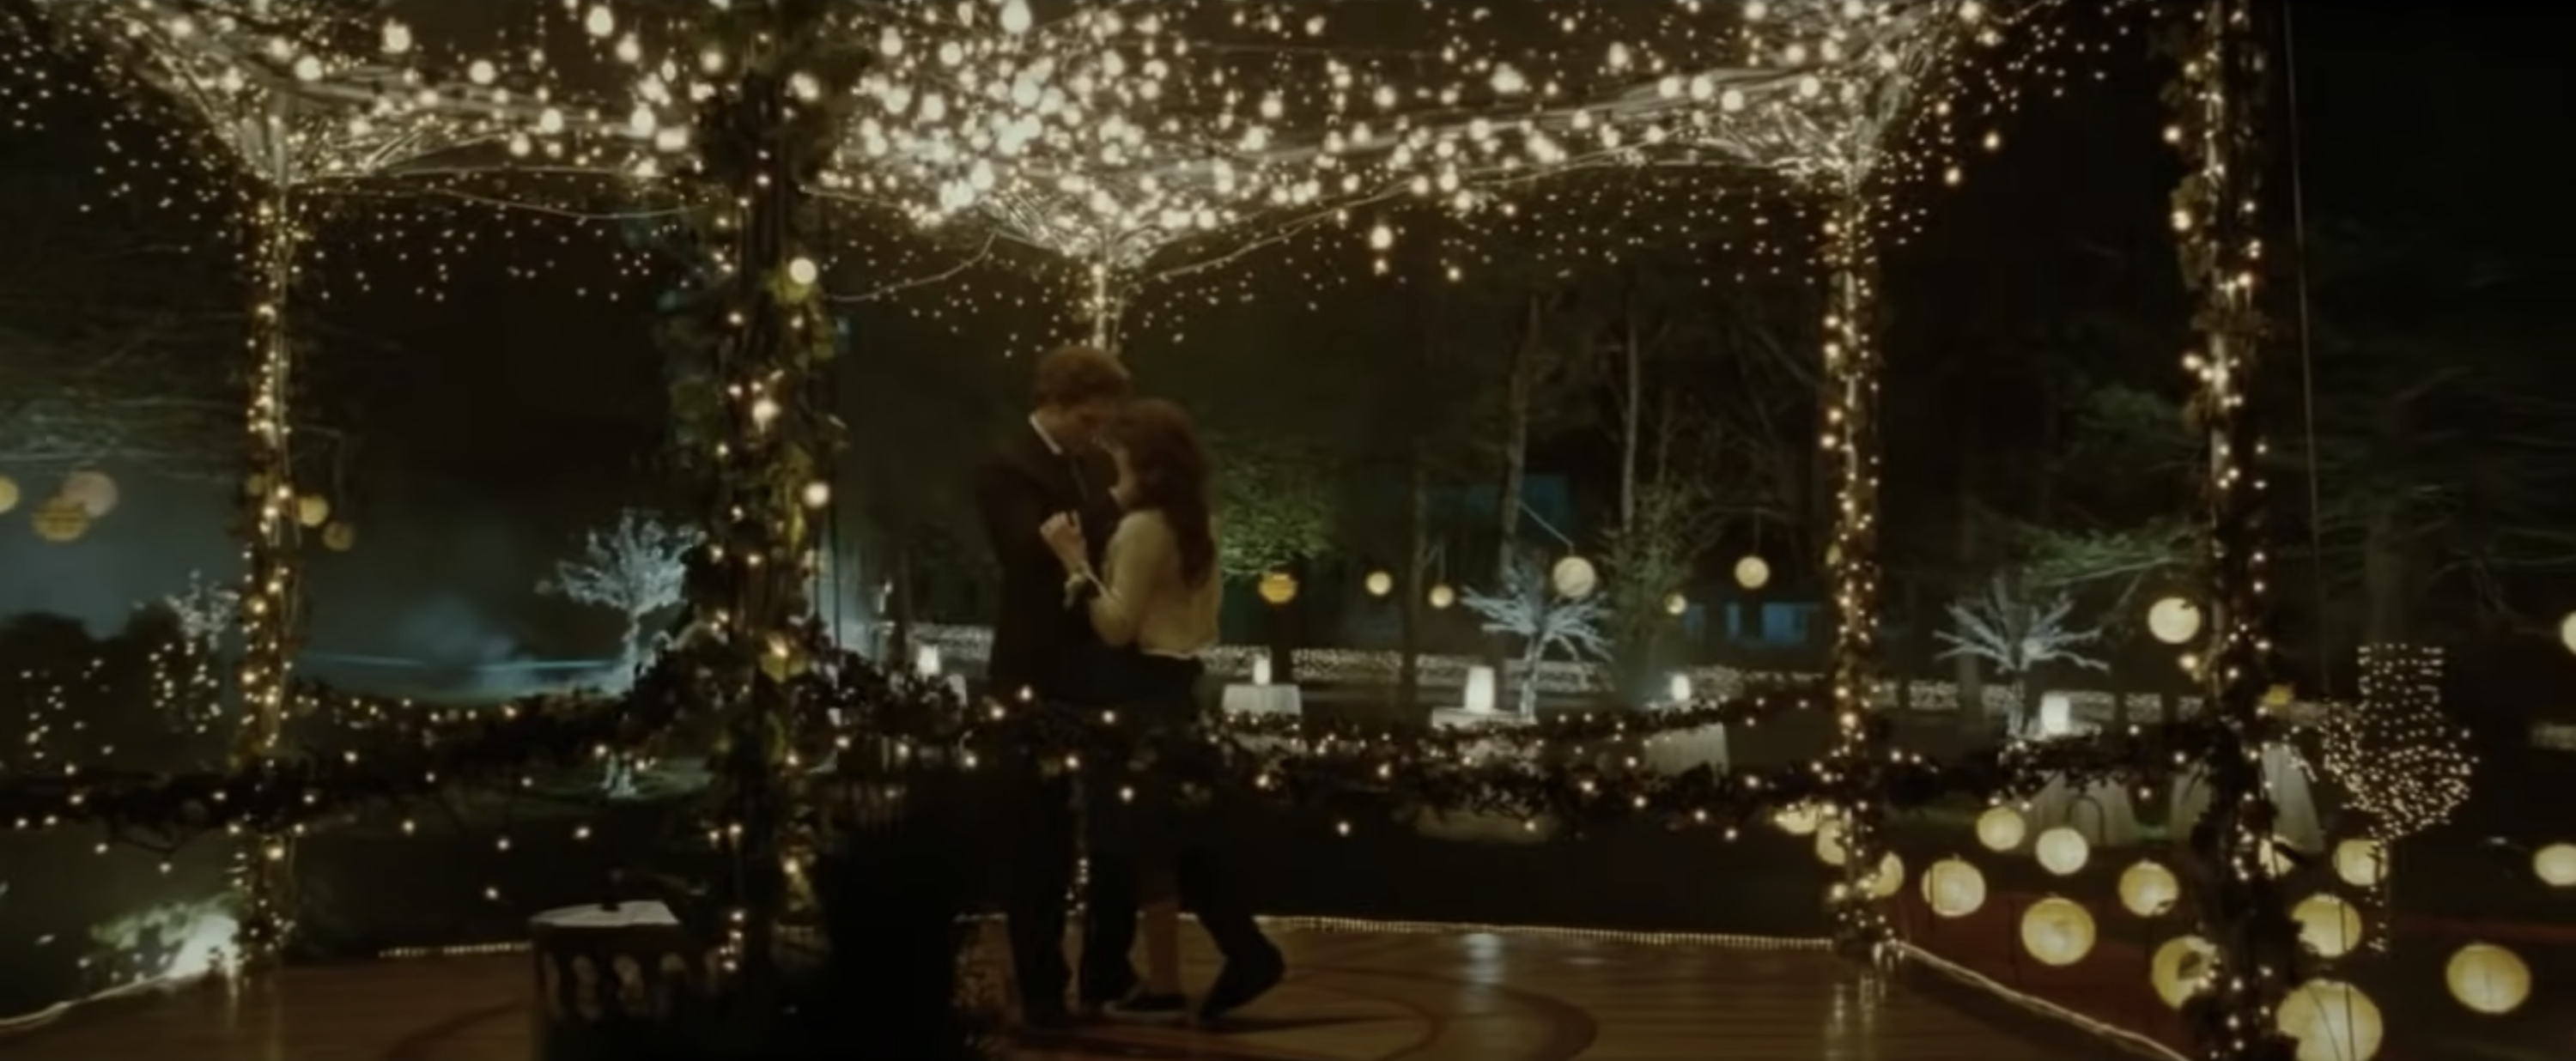 Robert Pattinson as Edward and Kristen Stewart as Bella dance under a gazebo wrapped in string lights during prom in &quot;Twilight&quot;